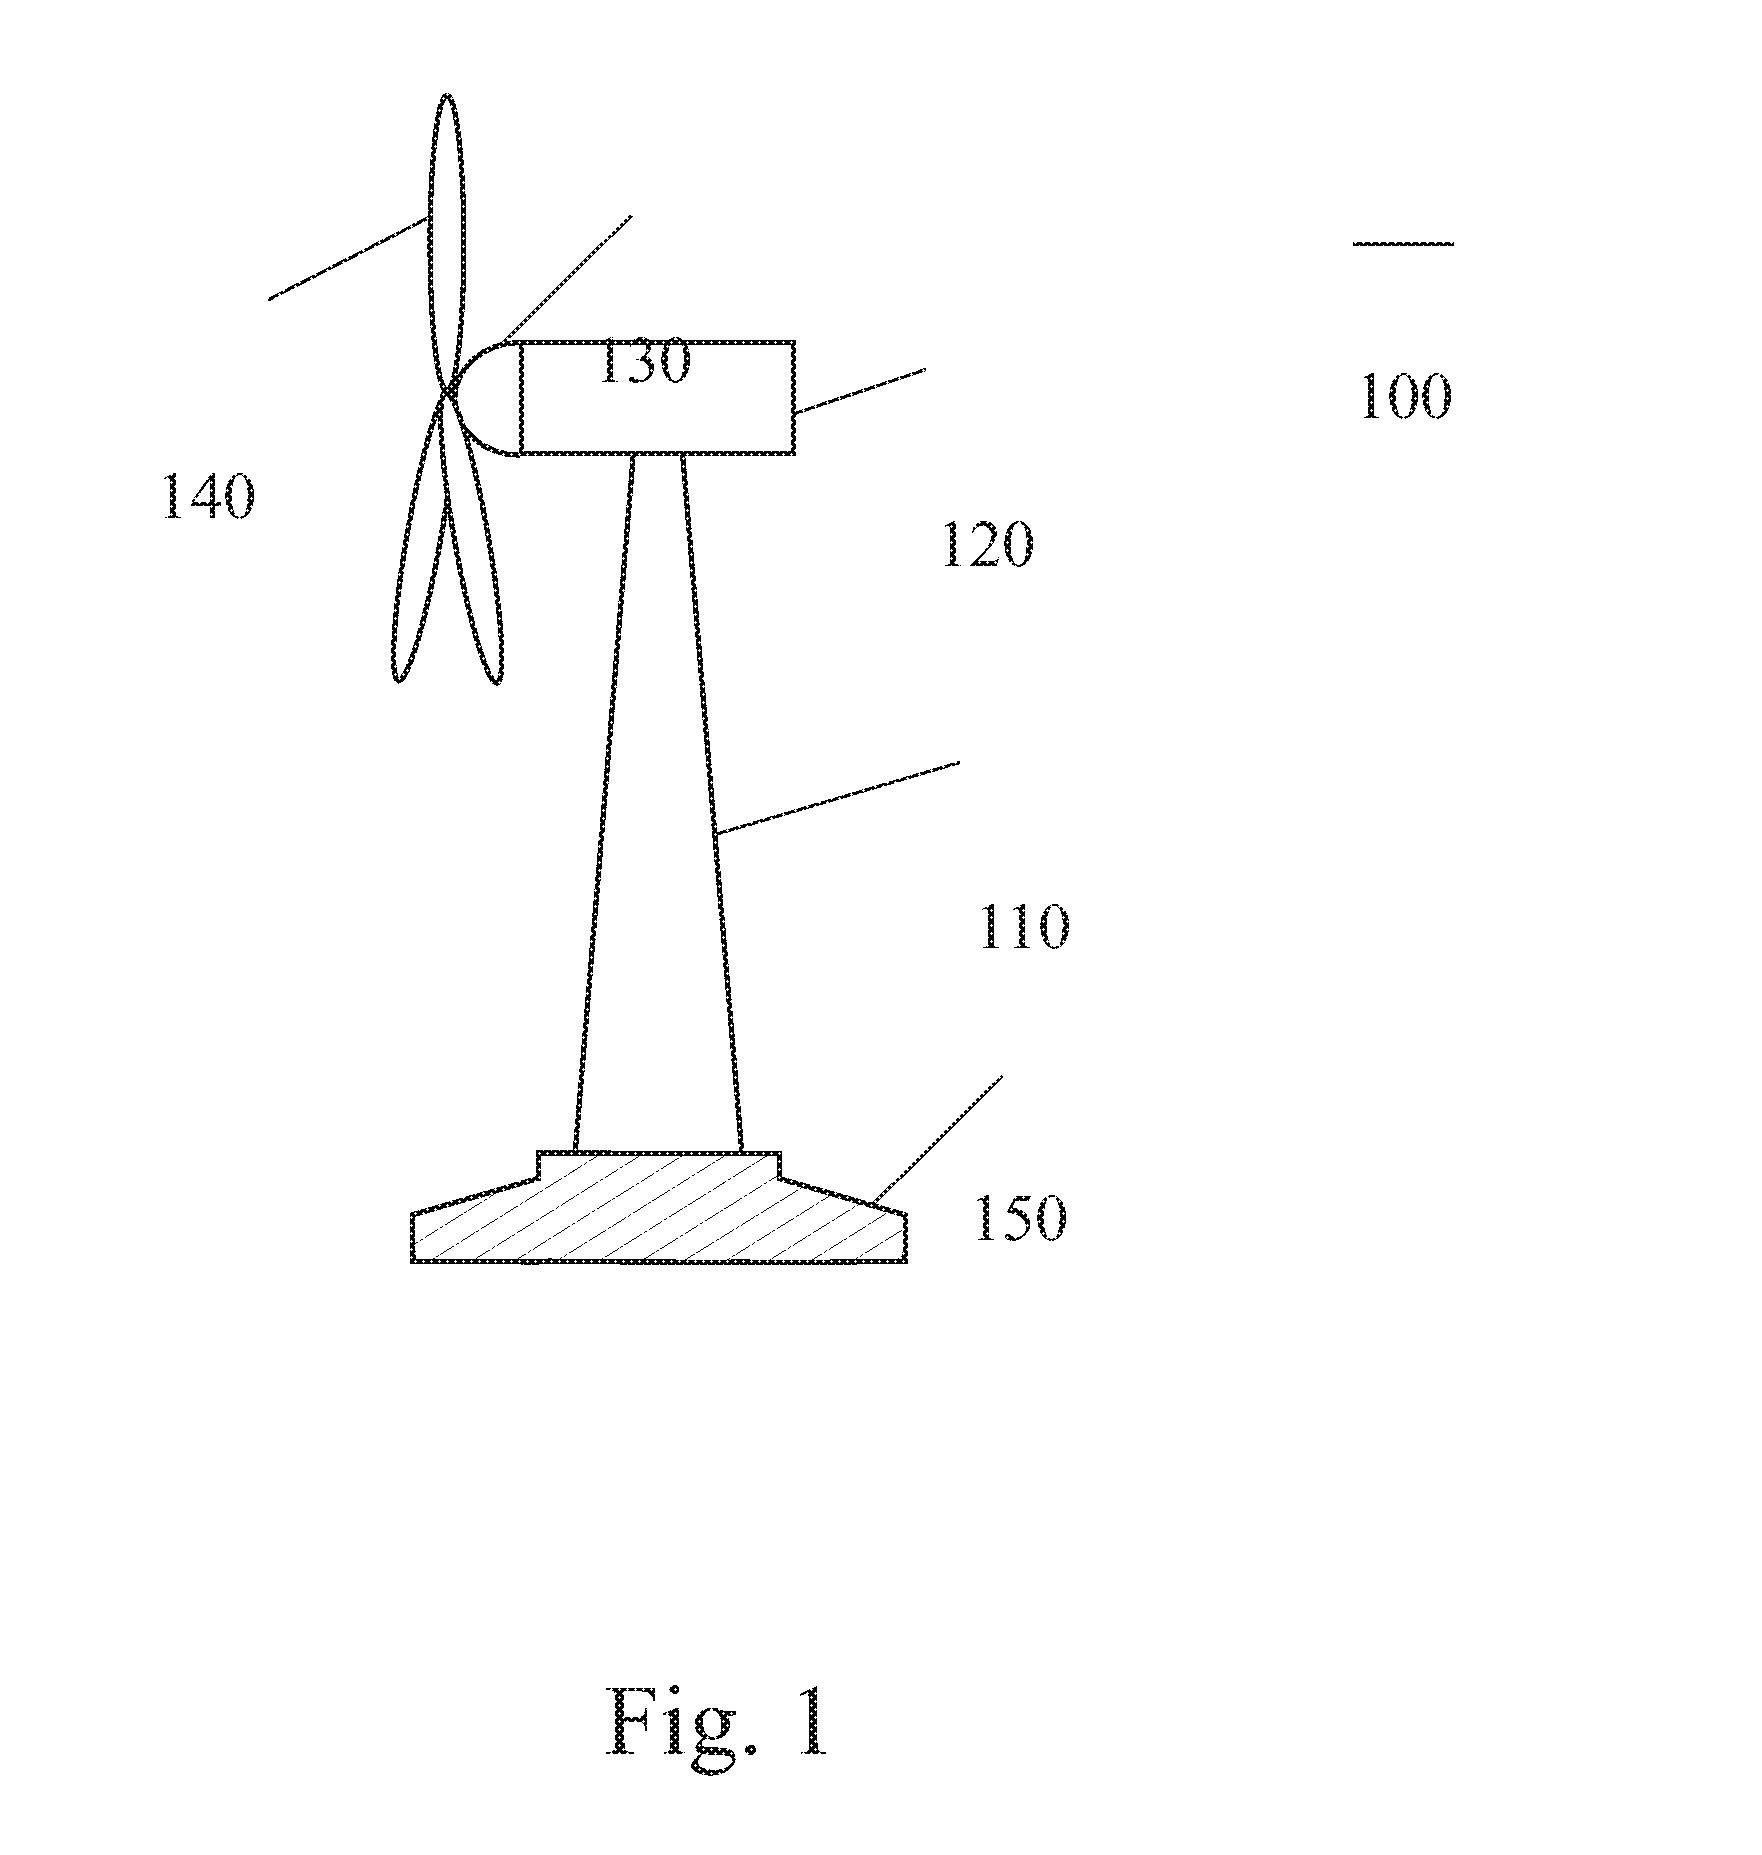 Tower adapter, method of producing a tower foundation and tower foundation